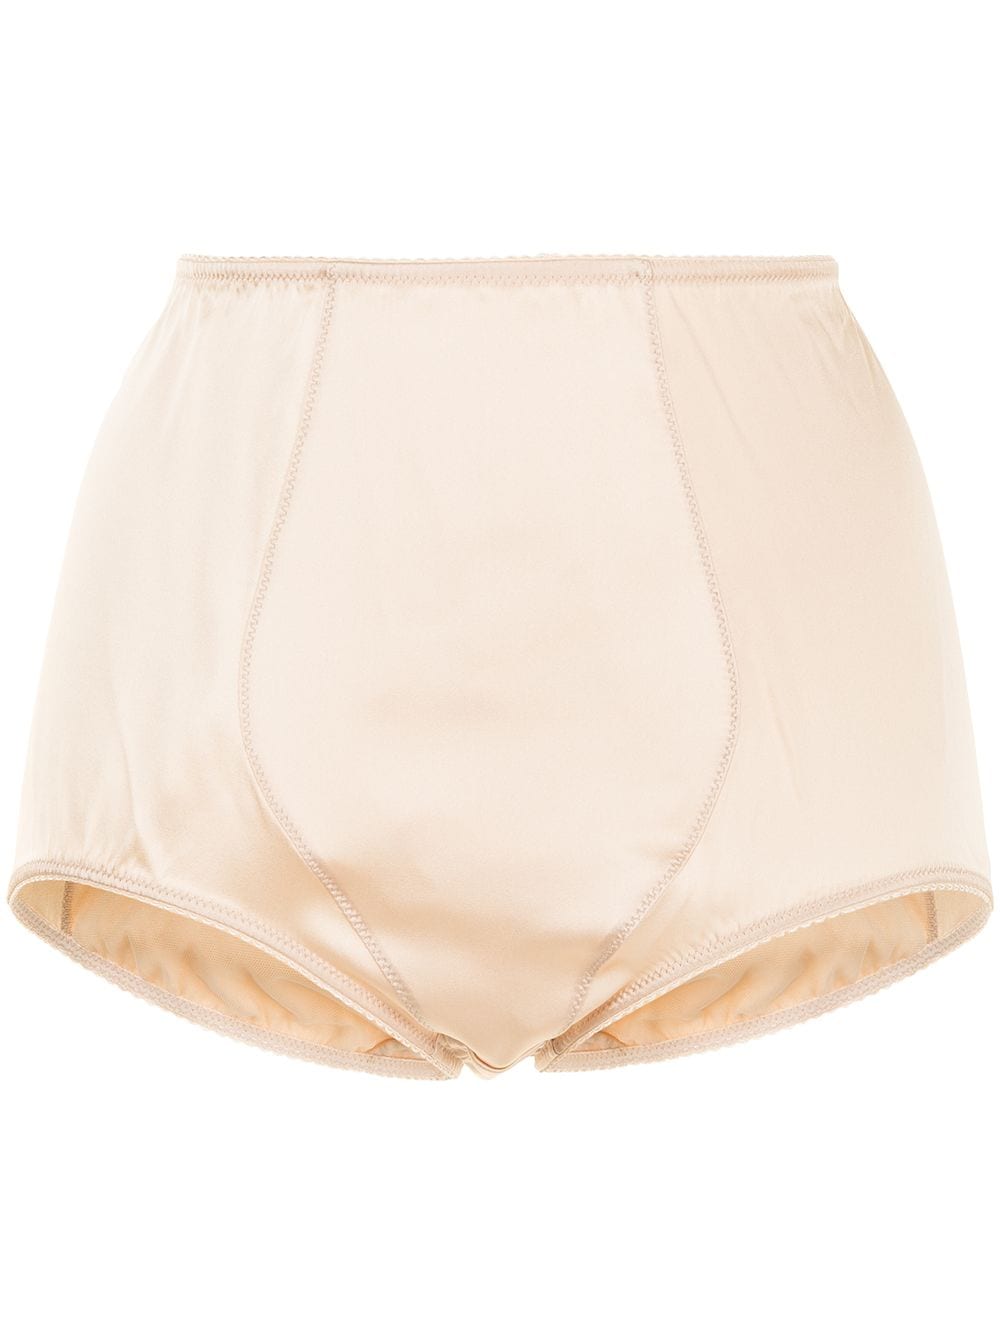 Dolce & Gabbana Satin High-waisted Panties In Pale Pink